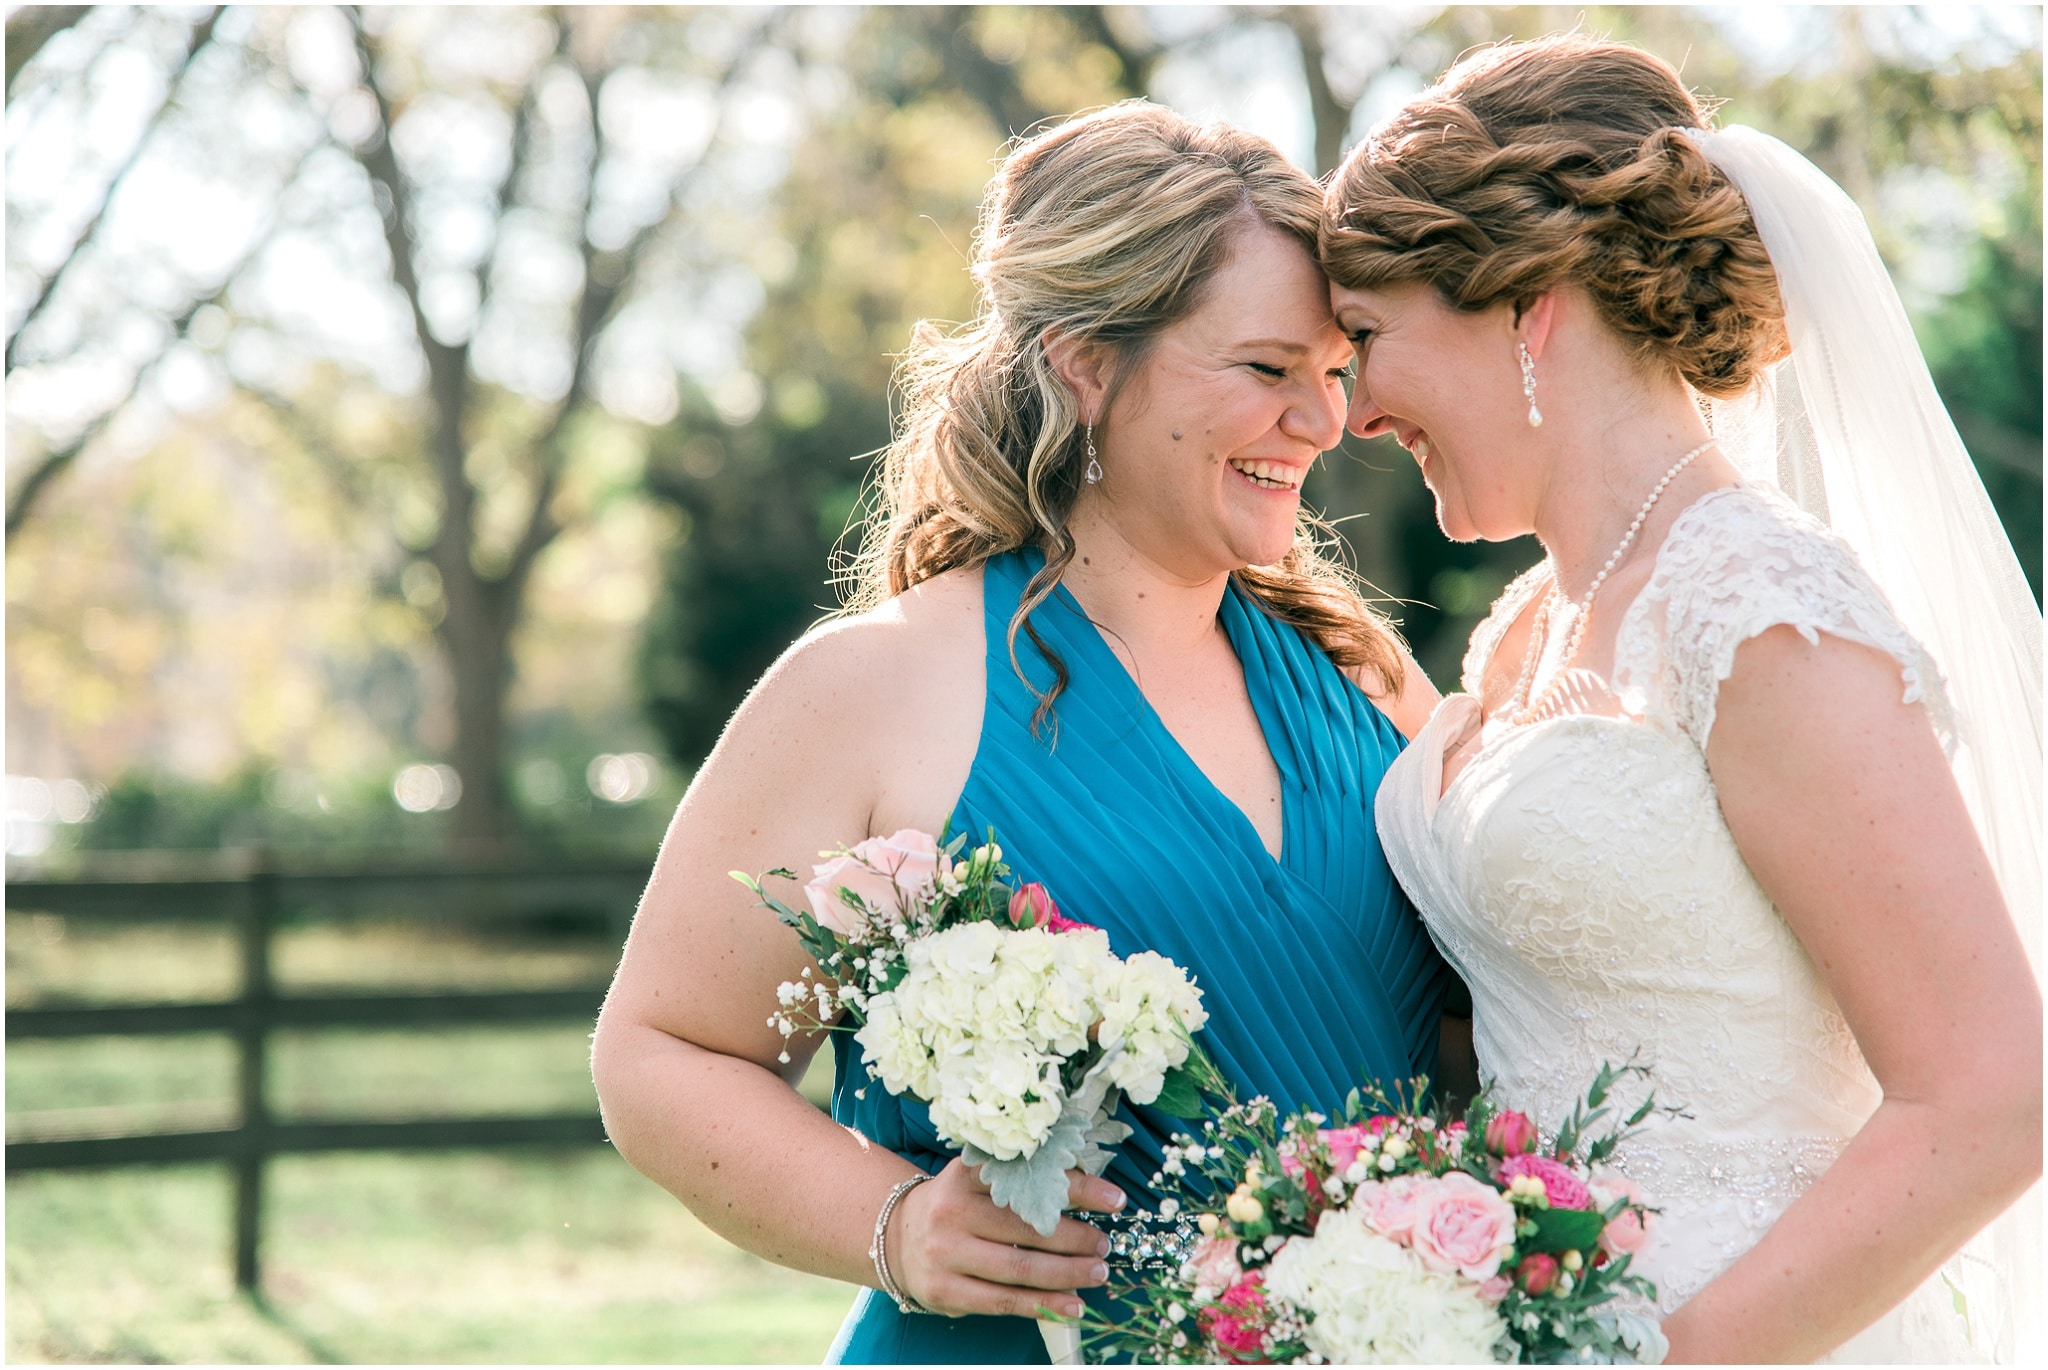 Paige and her maid of honour with bouquets, Upper Mill Plantation Wedding Session 8, Conway, South Carolina, Wedding coordinator, flowers and Cake - Willow Event Designs, Venue - Upper Mill Plantation, DJ - Carolina Entertainment, Dress - Foxy Lady, www.onelifephoto.net Photography